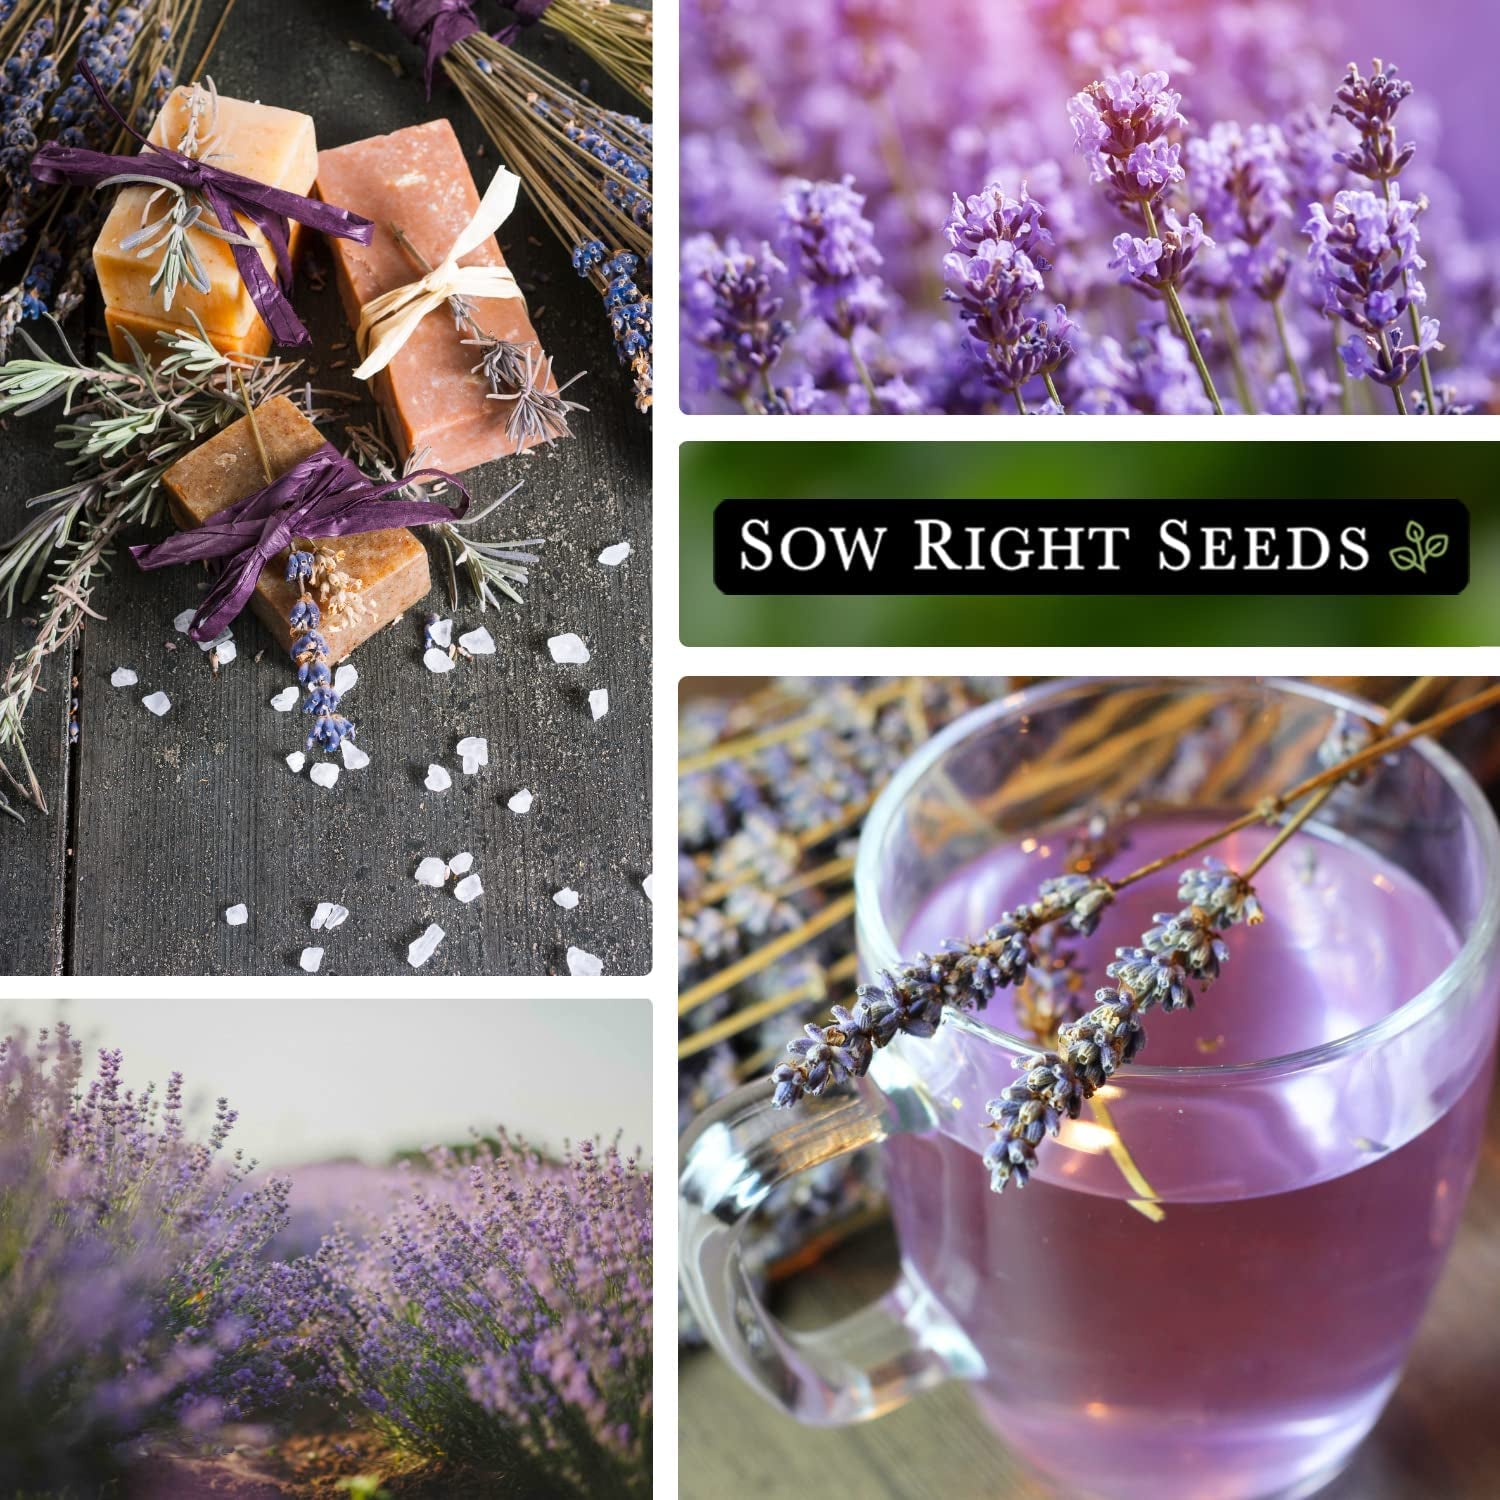 Sow Right Seeds - Lavender Seeds for Planting; Non-Gmo Heirloom Seeds with Instructions to Plant and Grow a Beautiful Indoor or Outdoor Herb Garden; Great Gardening Gift